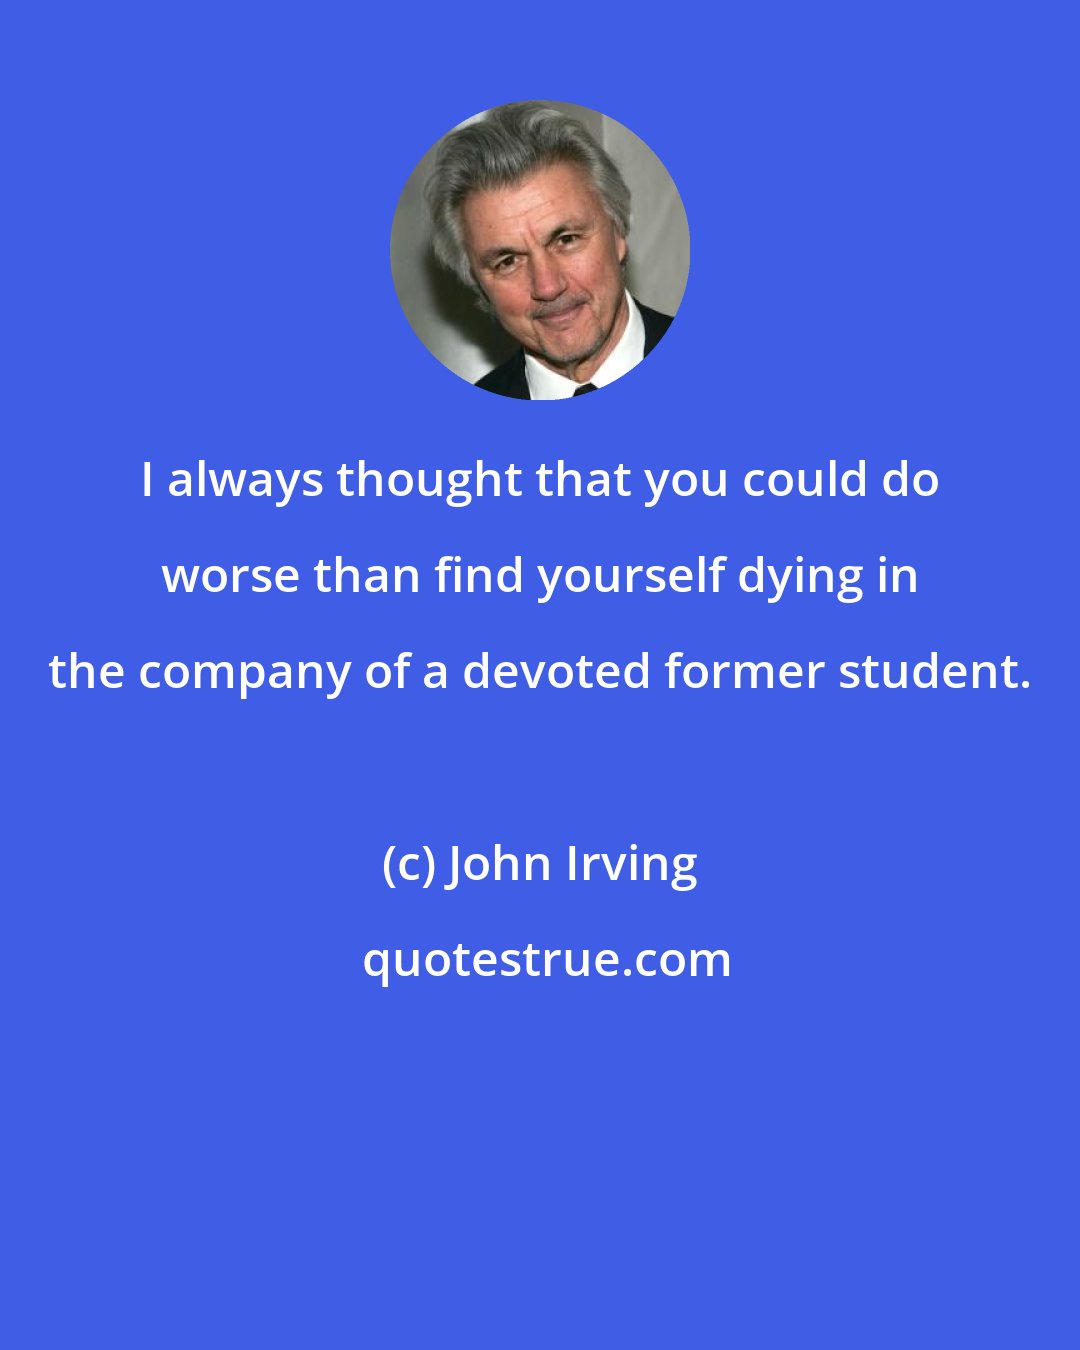 John Irving: I always thought that you could do worse than find yourself dying in the company of a devoted former student.